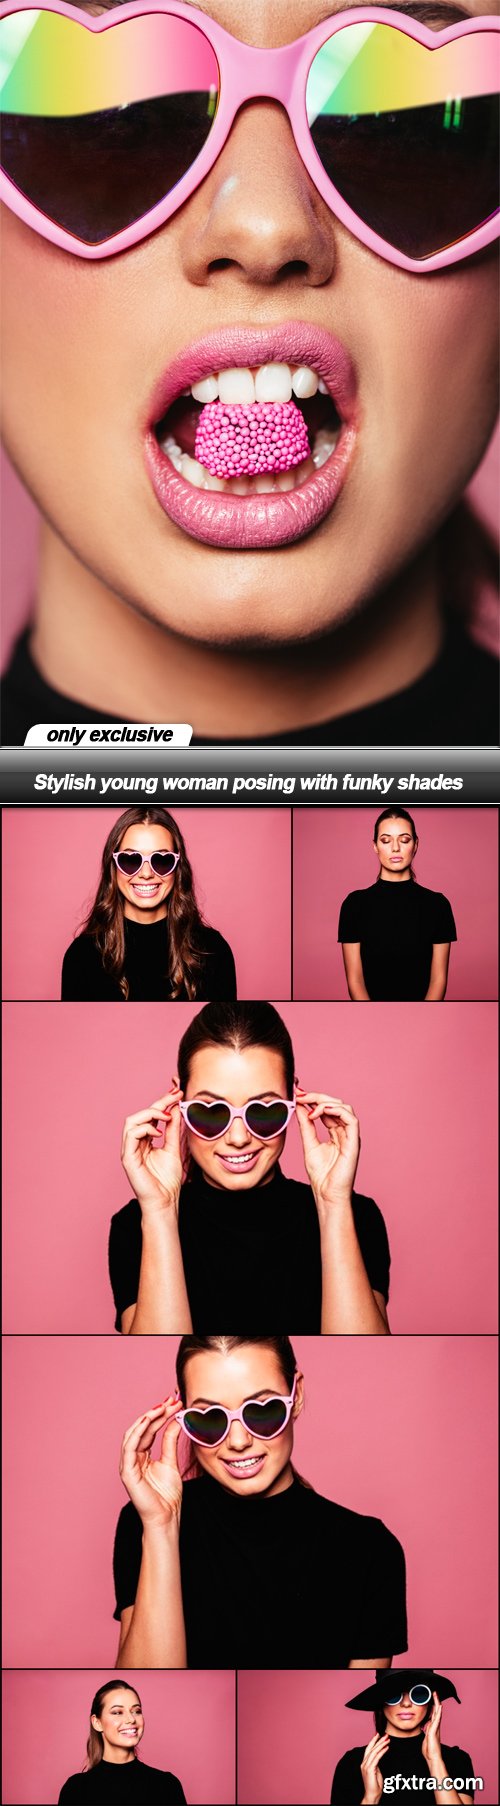 Stylish young woman posing with funky shades - 7 UHQ JPEG